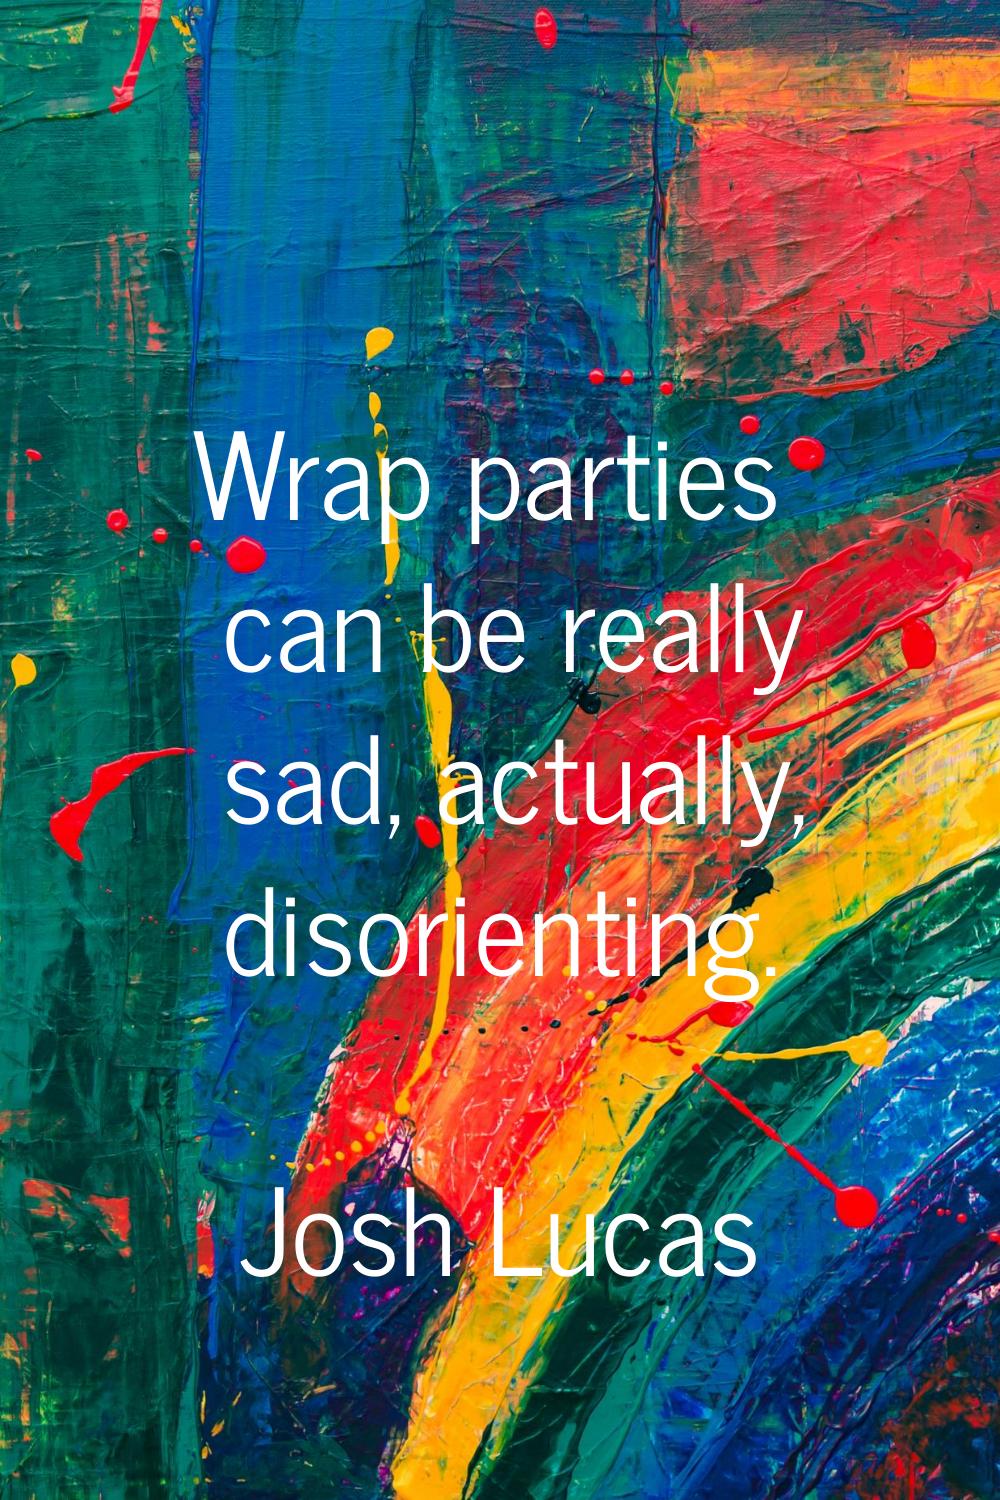 Wrap parties can be really sad, actually, disorienting.